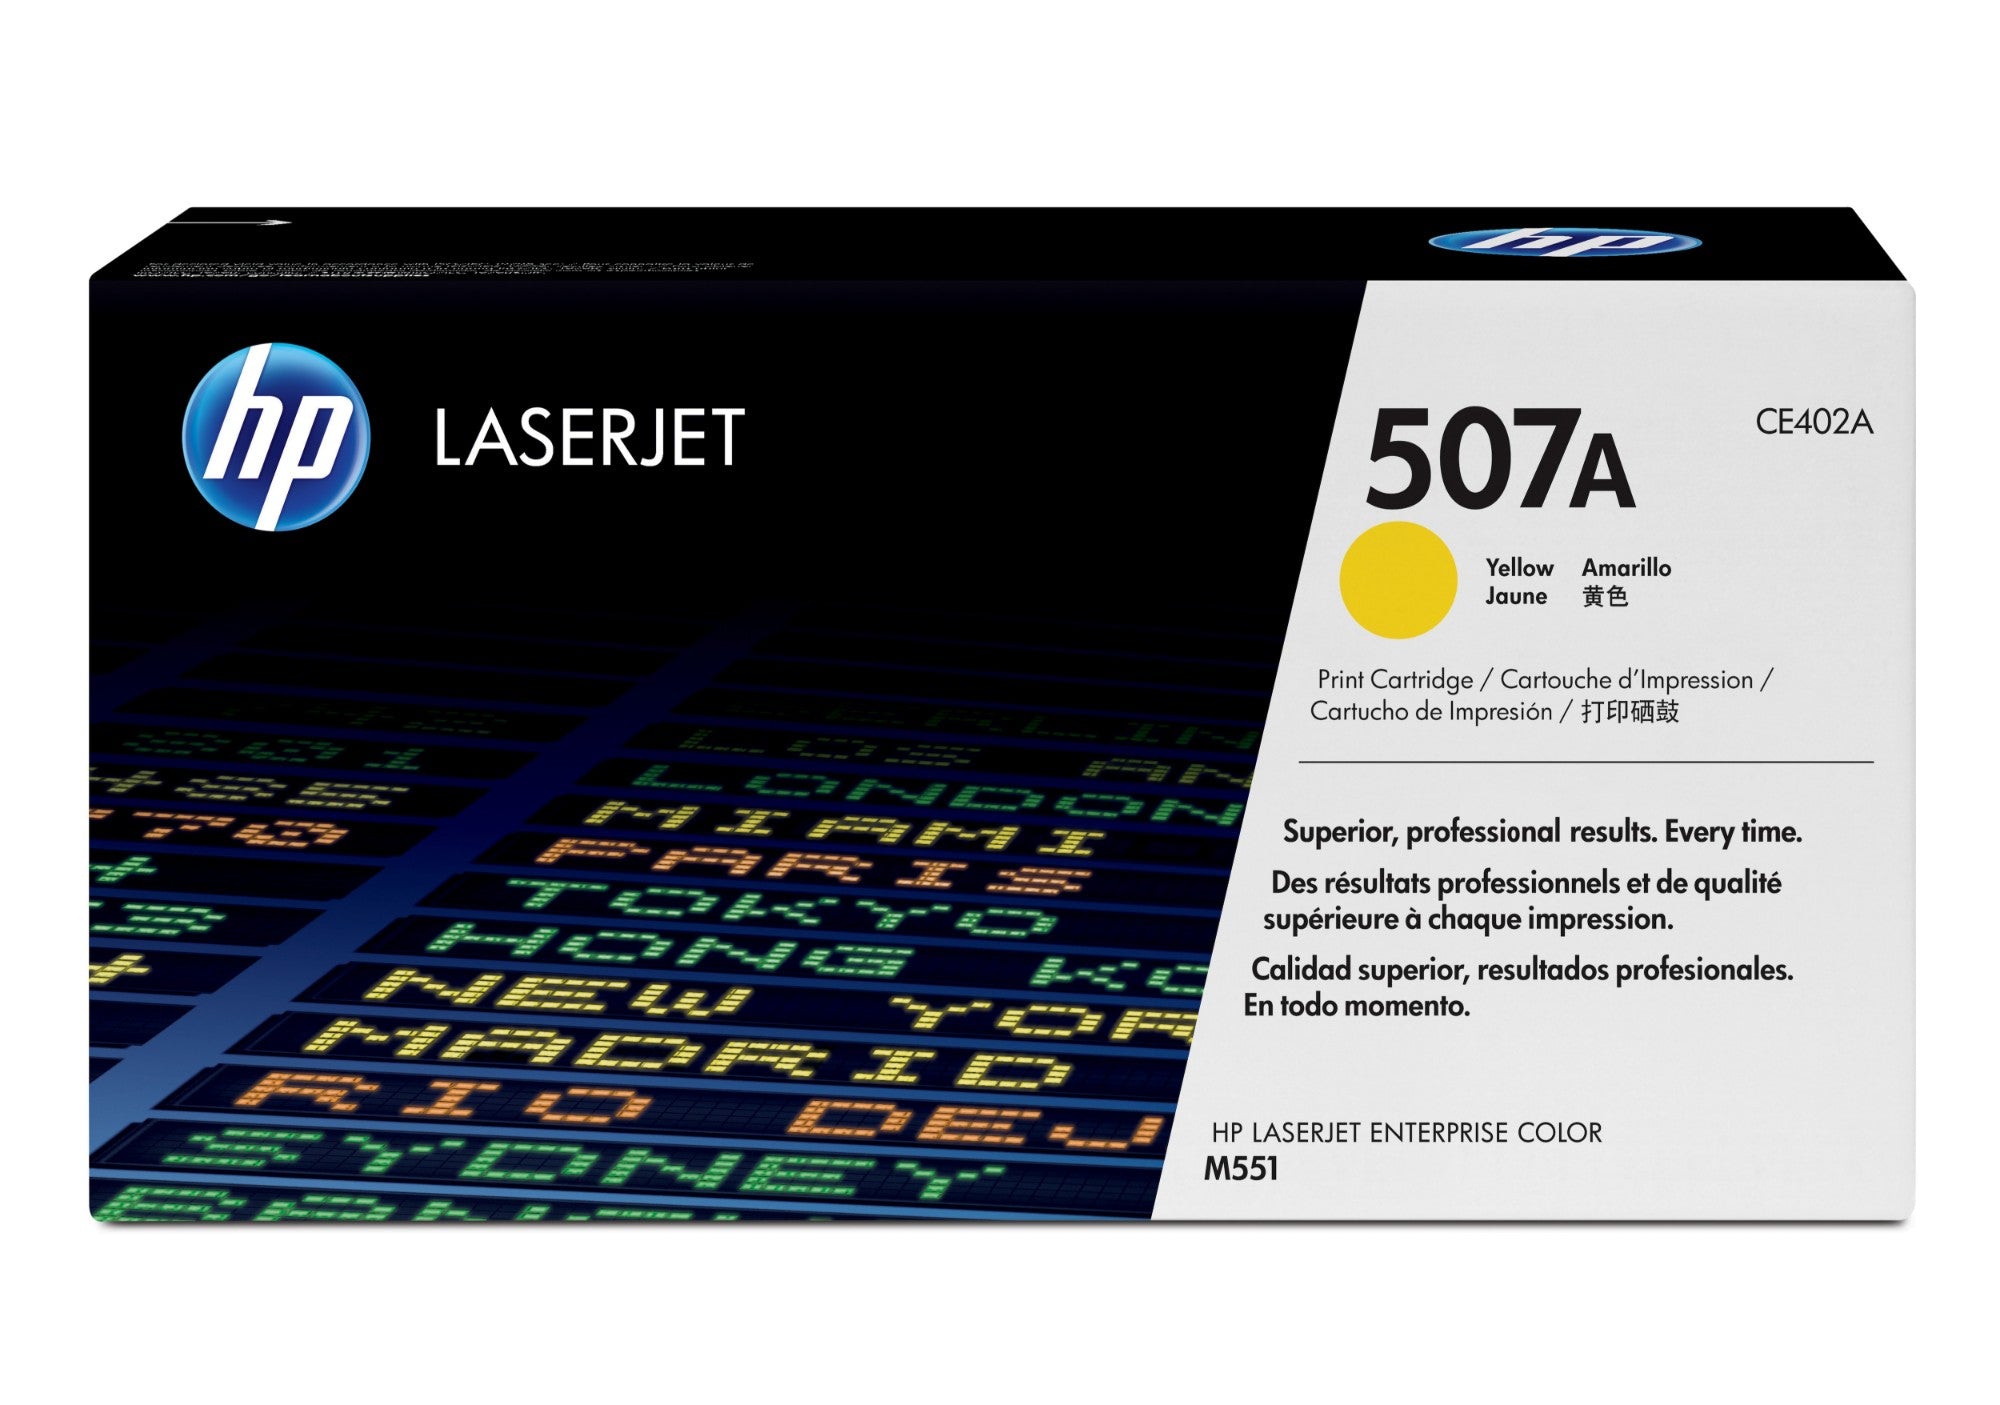 HP CE402A/507A Toner cartridge yellow, 6K pages ISO/IEC 19798 for HP LaserJet EP 500